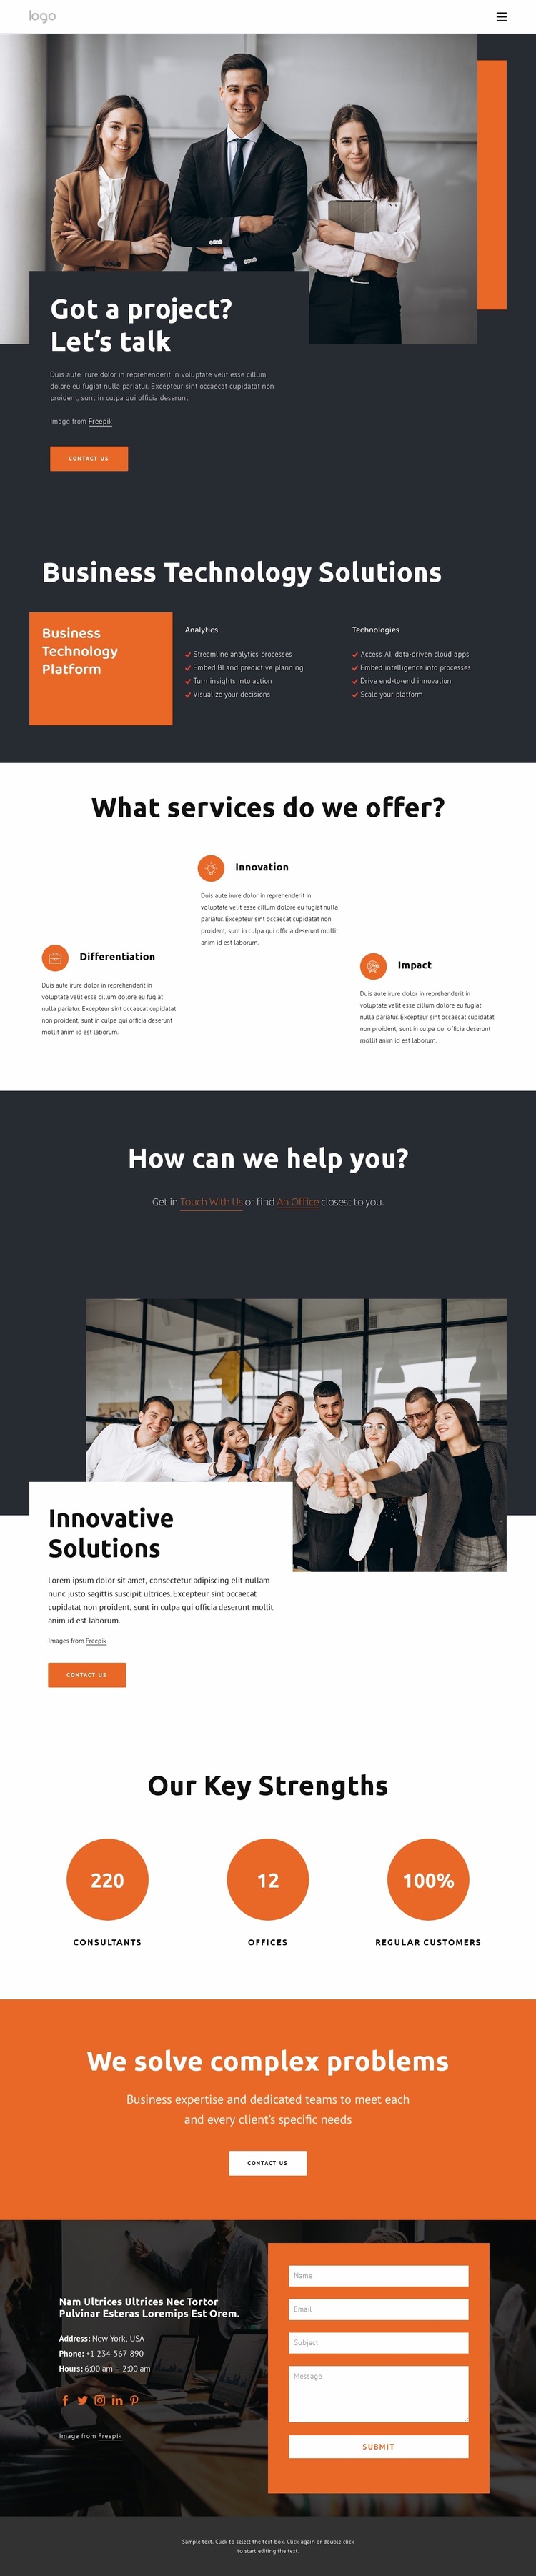 One of the best-known firms Landing Page